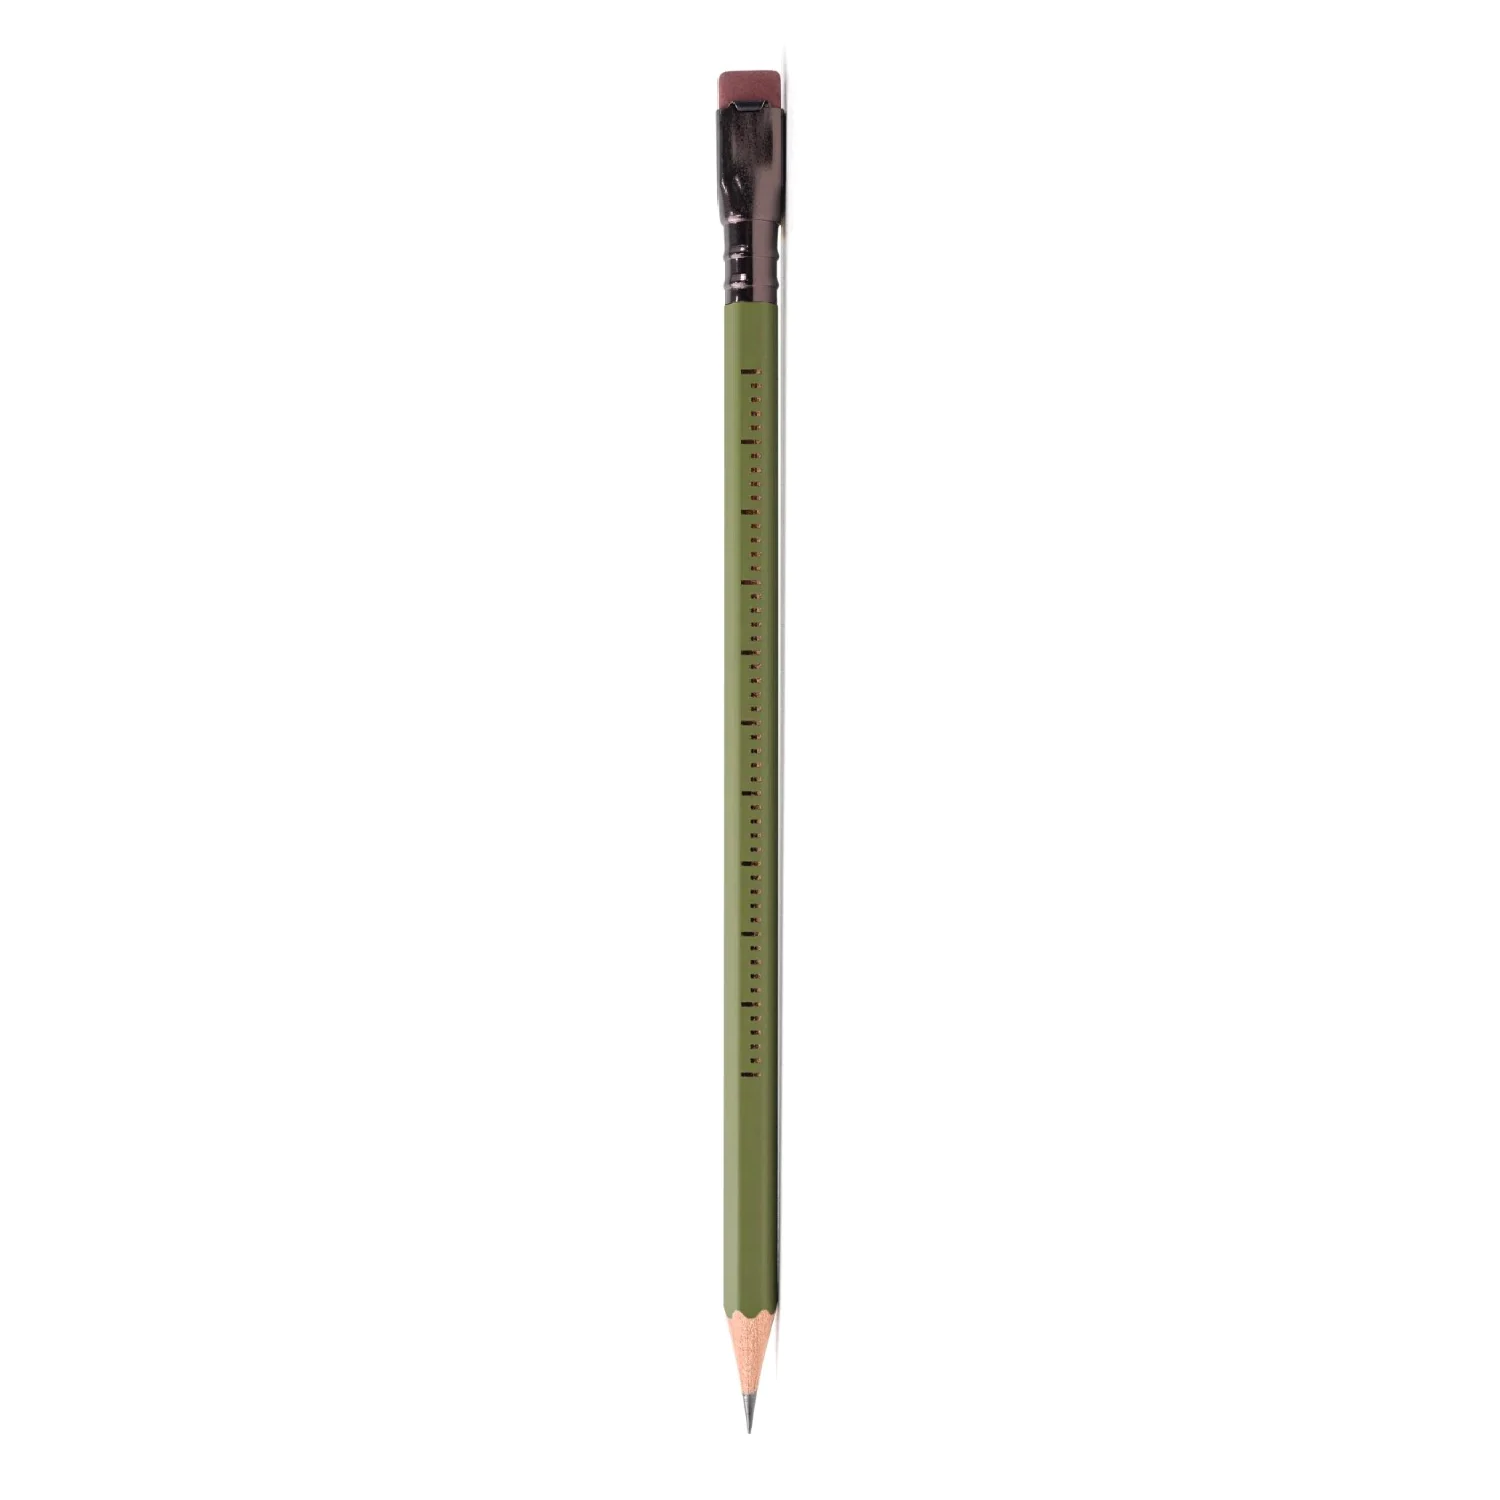 Blackwing Volume 17 Gardening - Pencraft the boutique